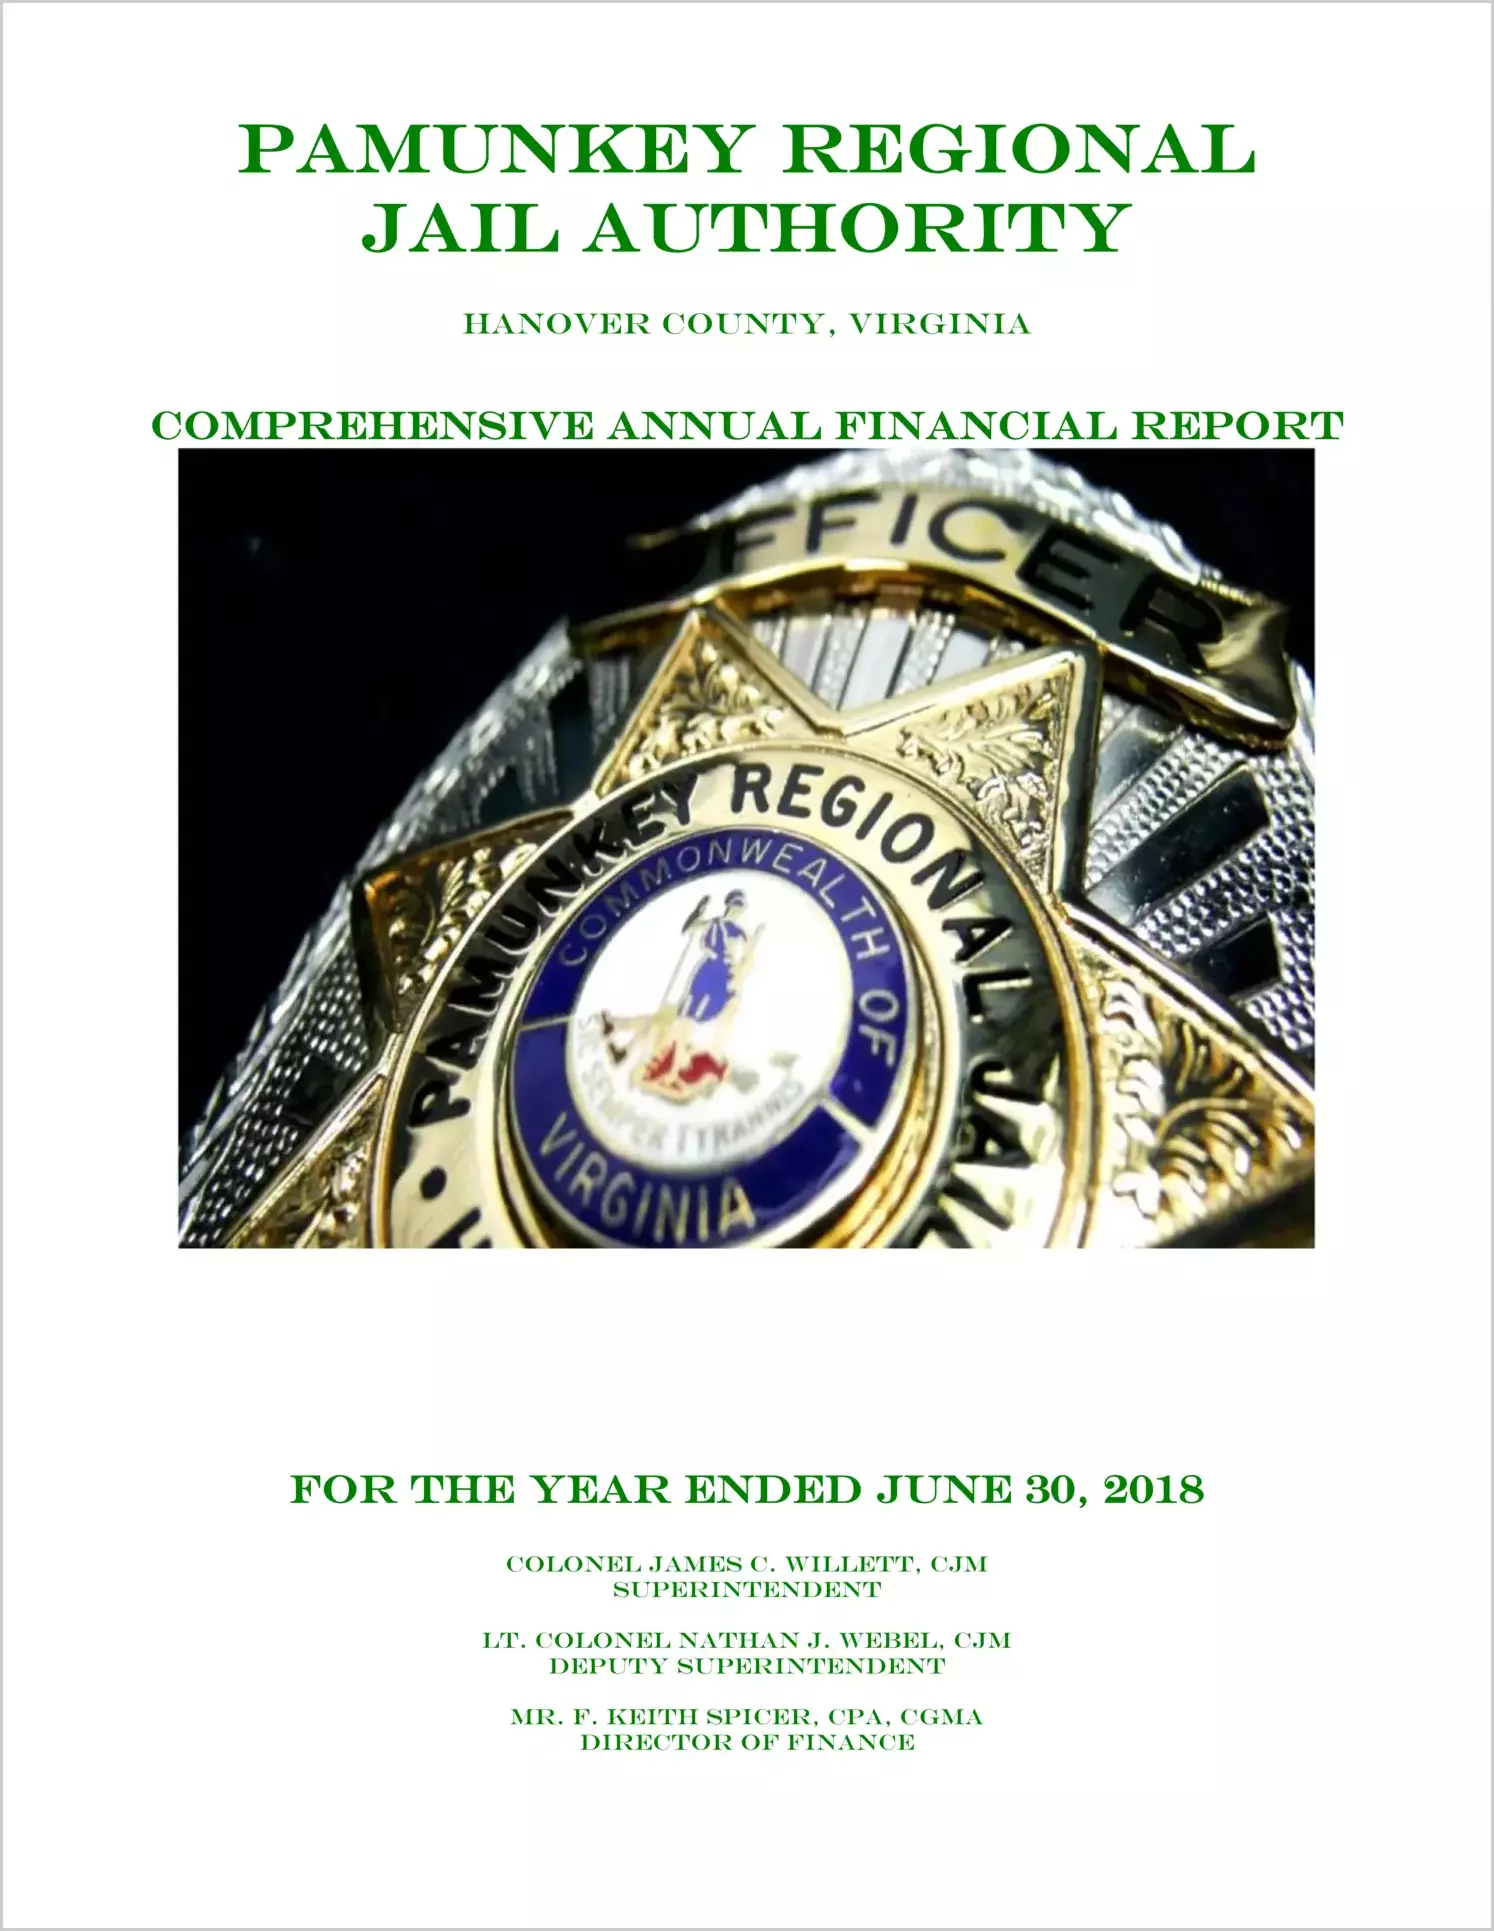 2018 ABC/Other Annual Financial Report  for Pamunkey Regional Jail Authority